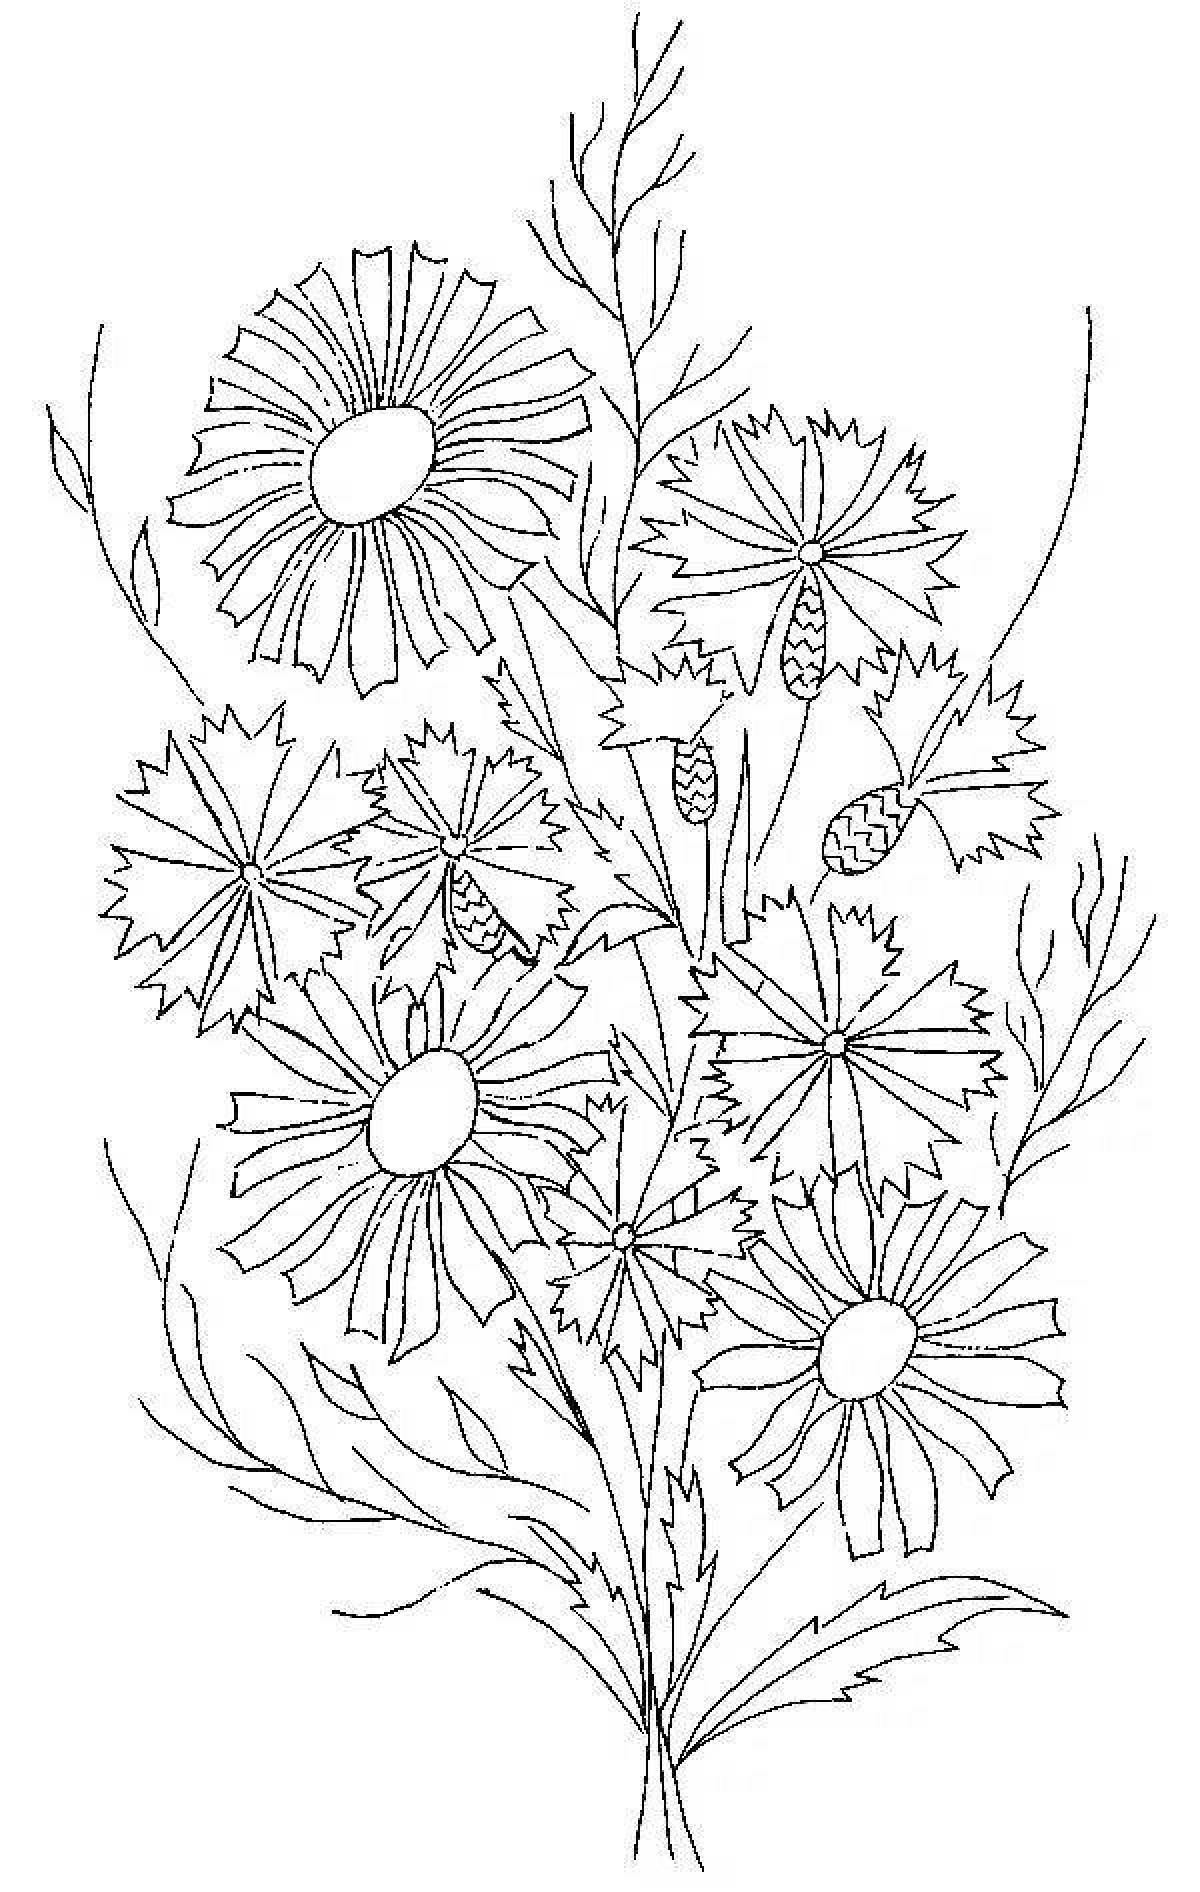 Coloring book calm bouquet of daisies